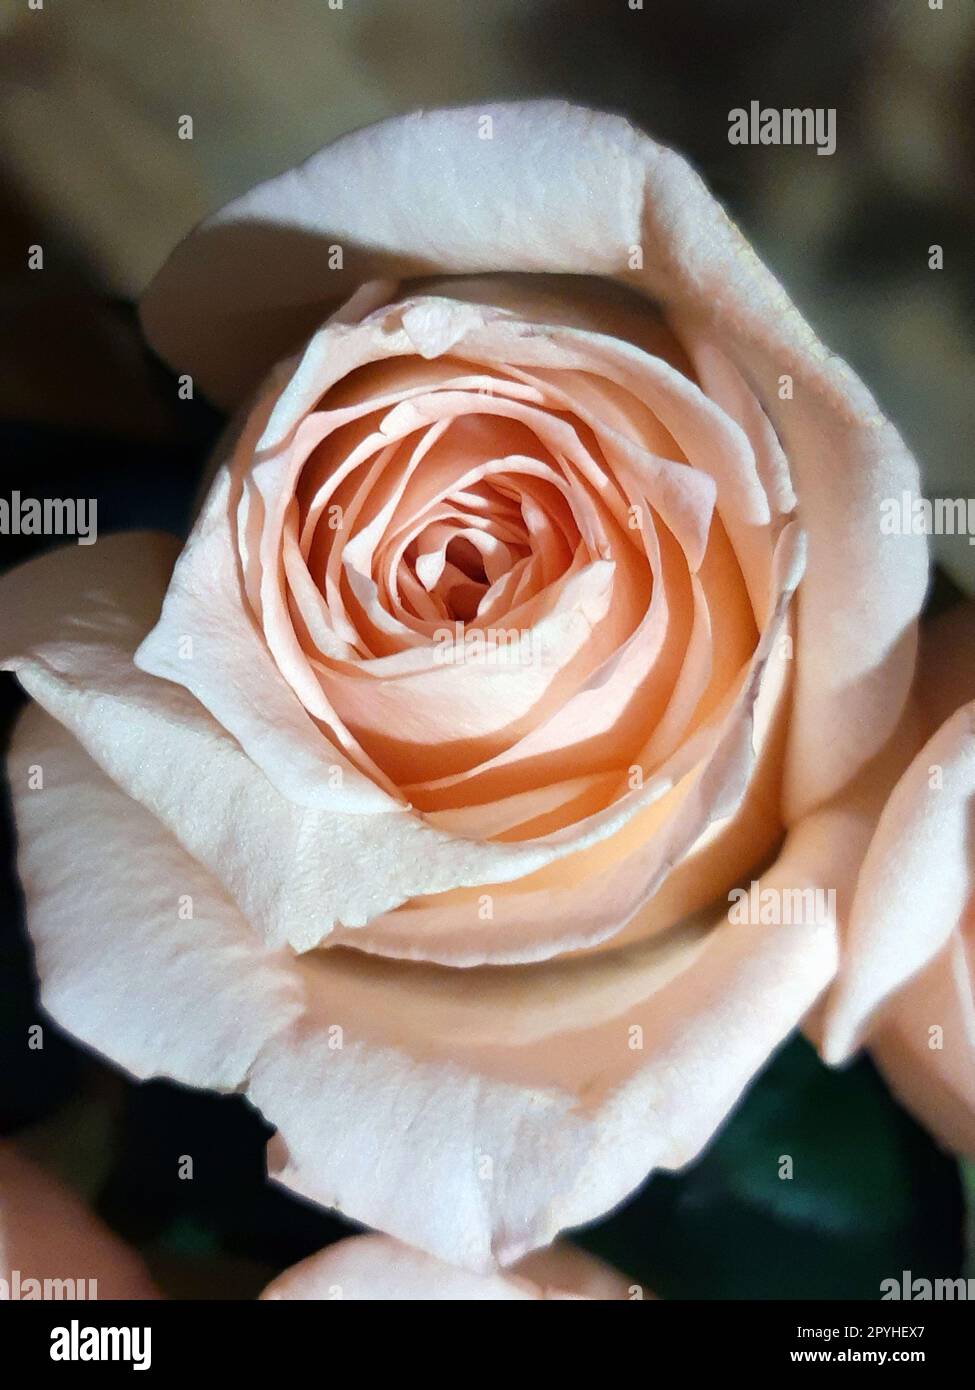 Beige color rose bud close up Stock Photo